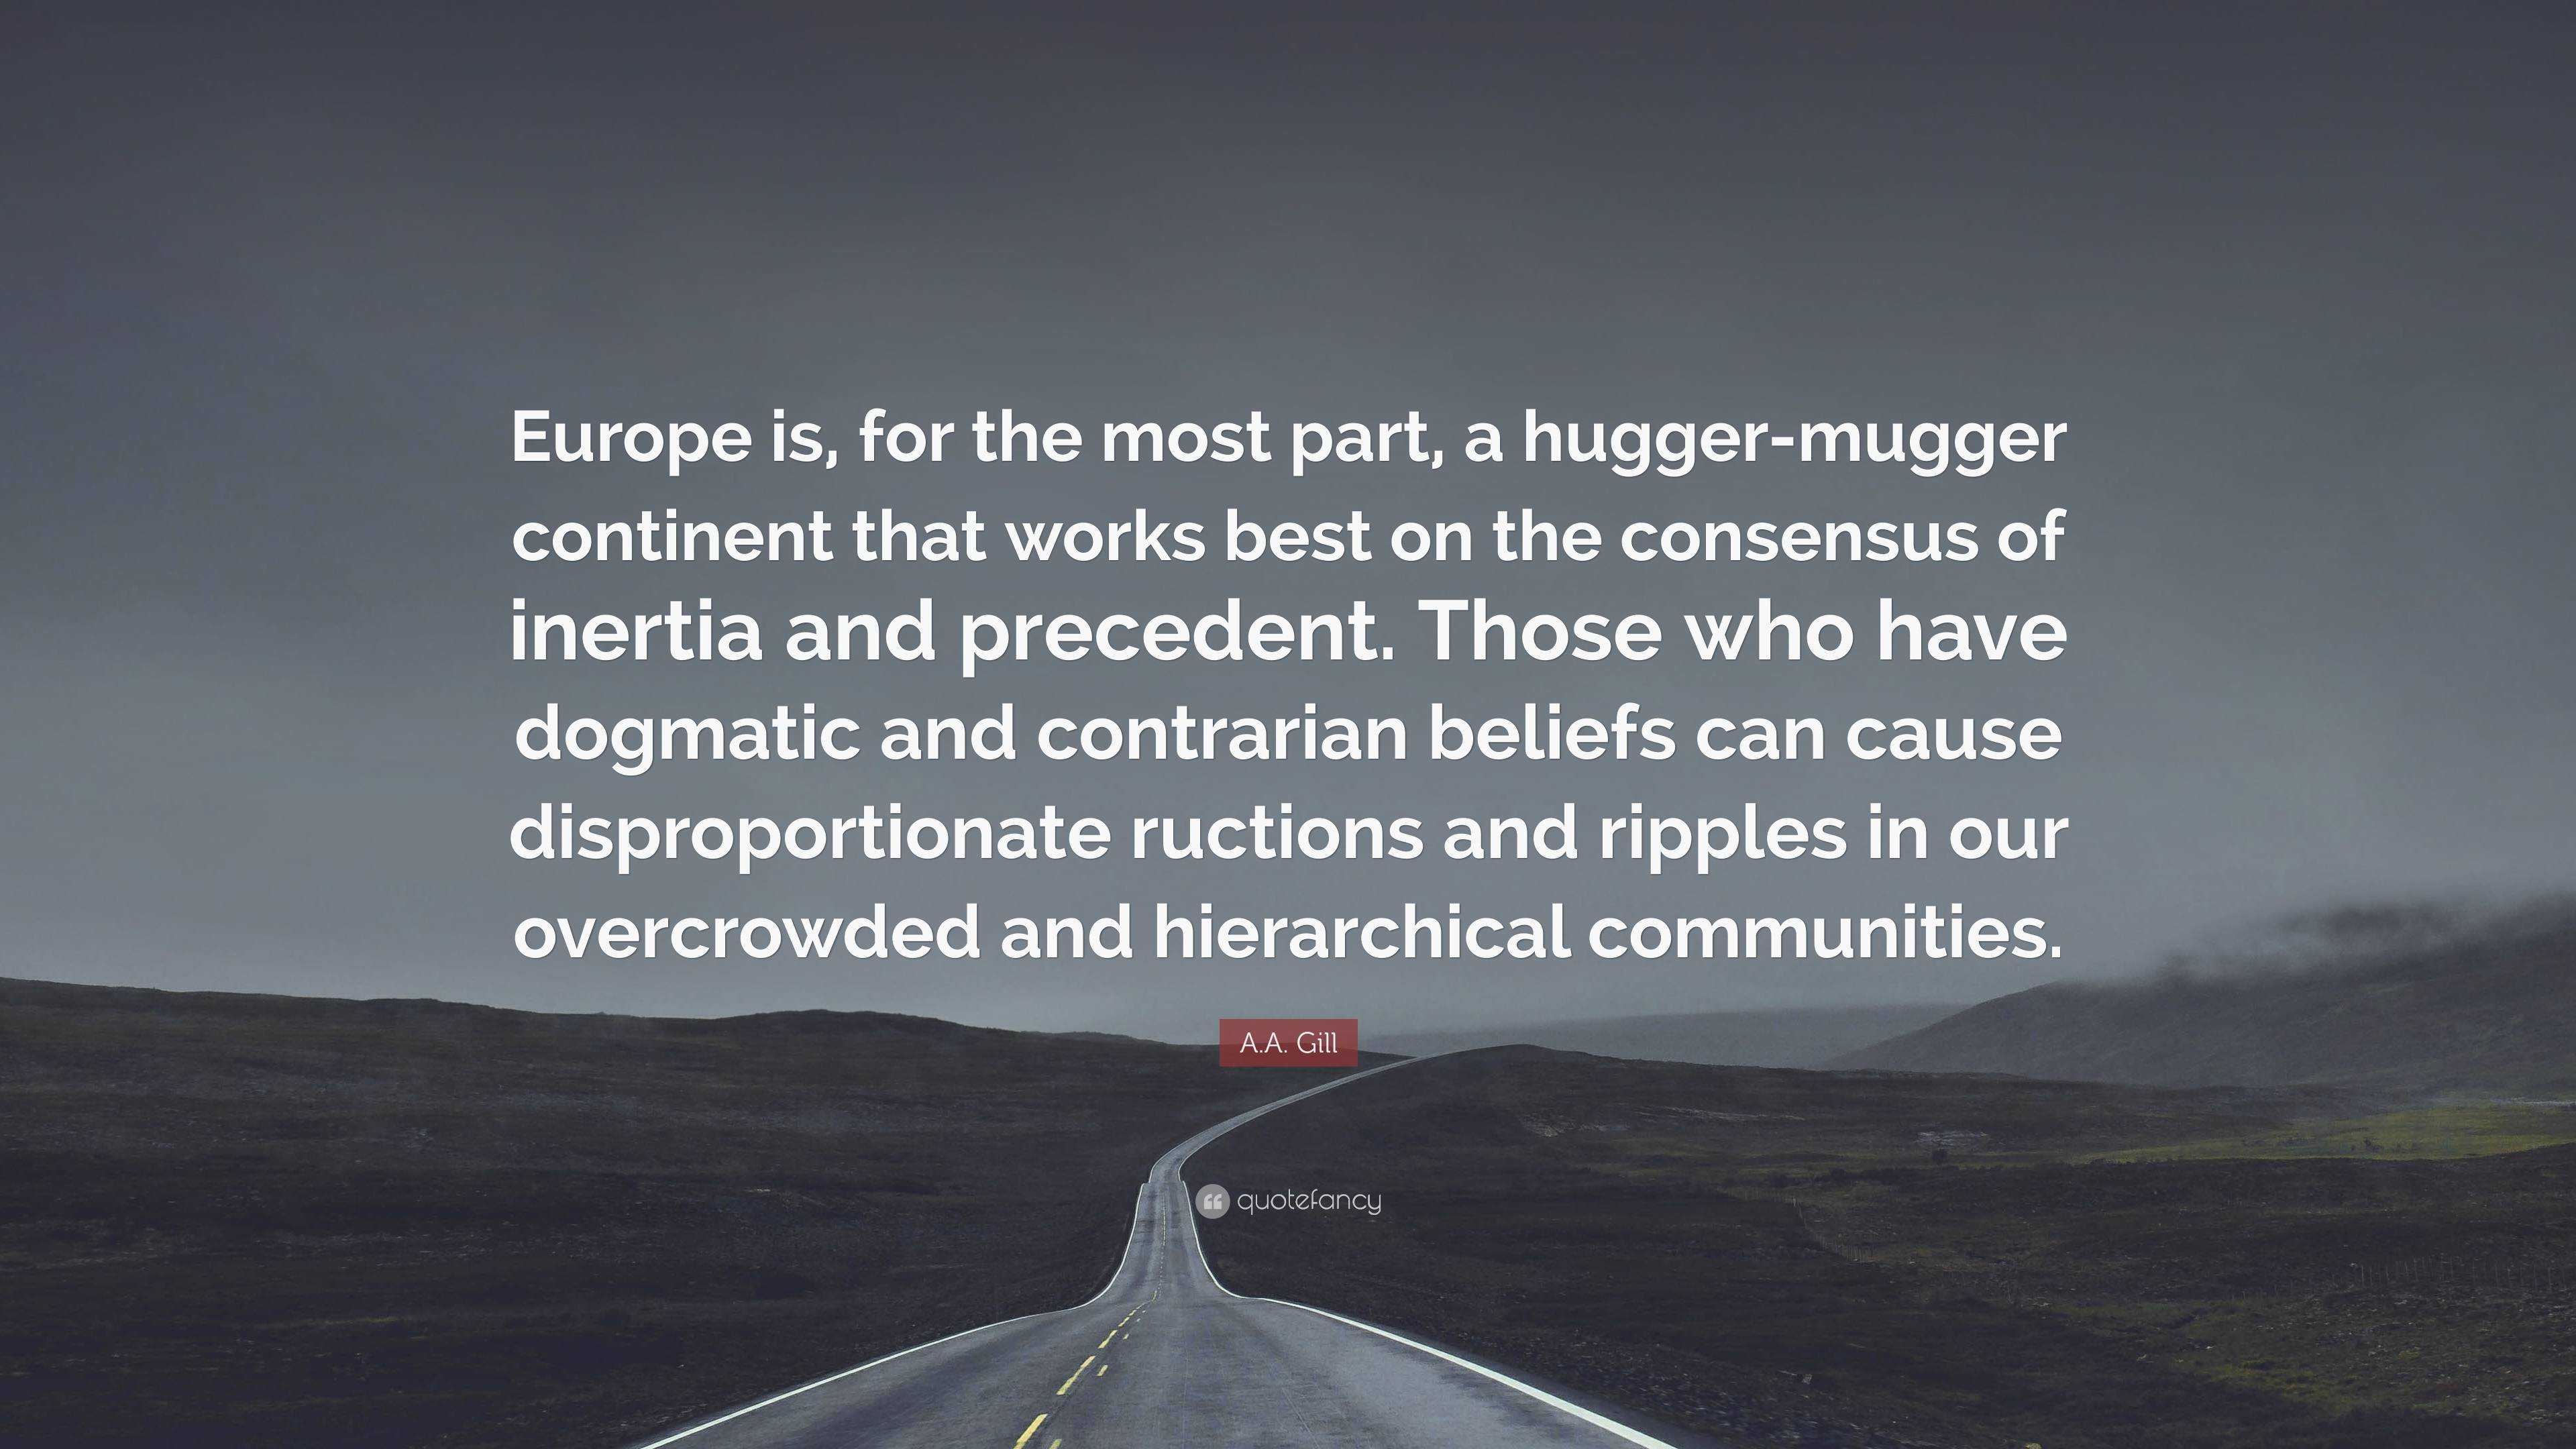 https://quotefancy.com/media/wallpaper/3840x2160/6677196-A-A-Gill-Quote-Europe-is-for-the-most-part-a-hugger-mugger.jpg